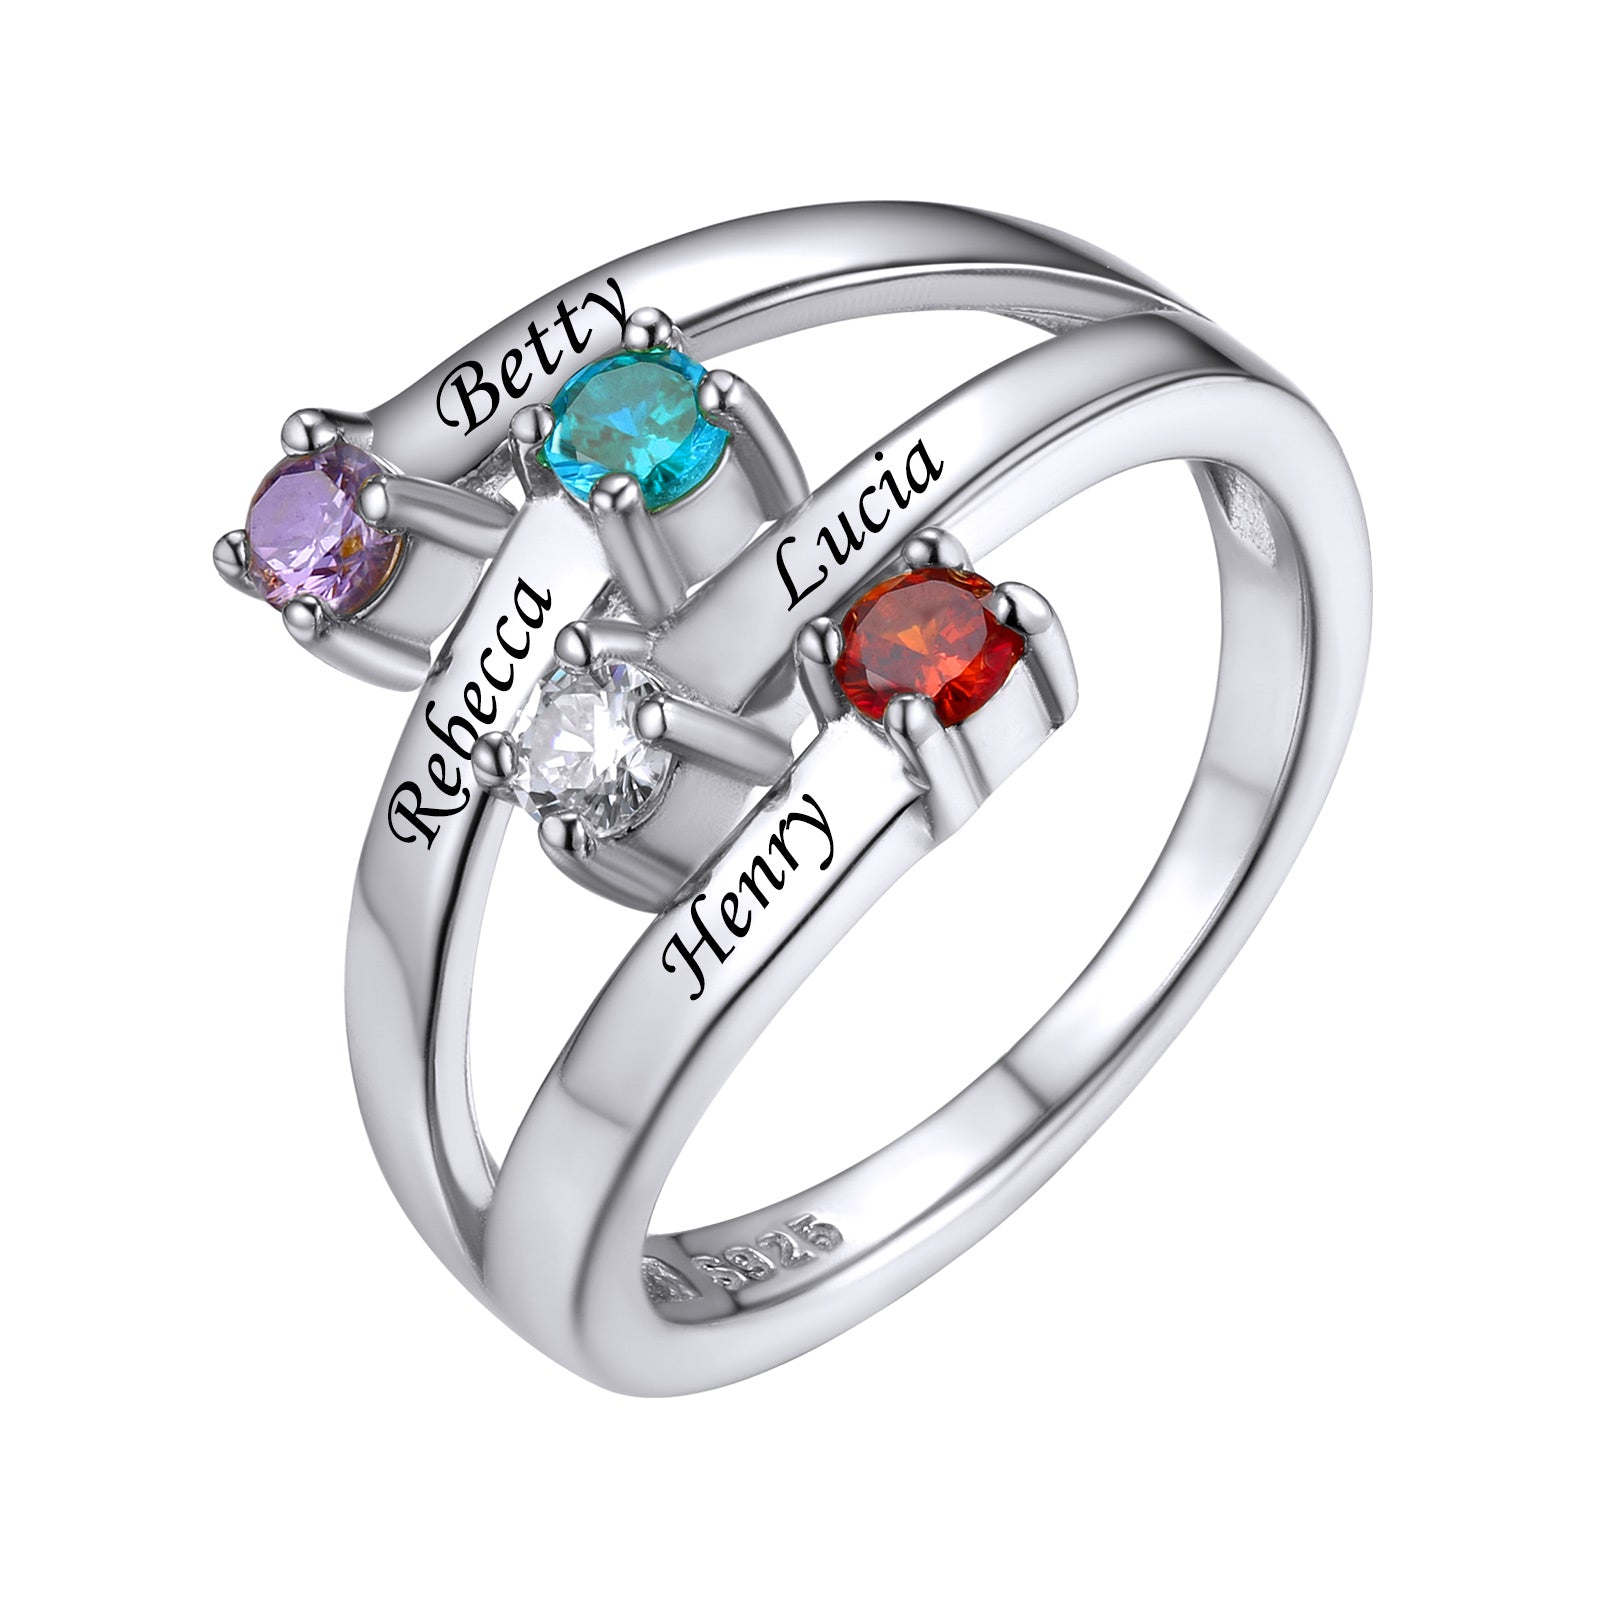 Adjustable Sterling Silver Personalized Birthstone Ring